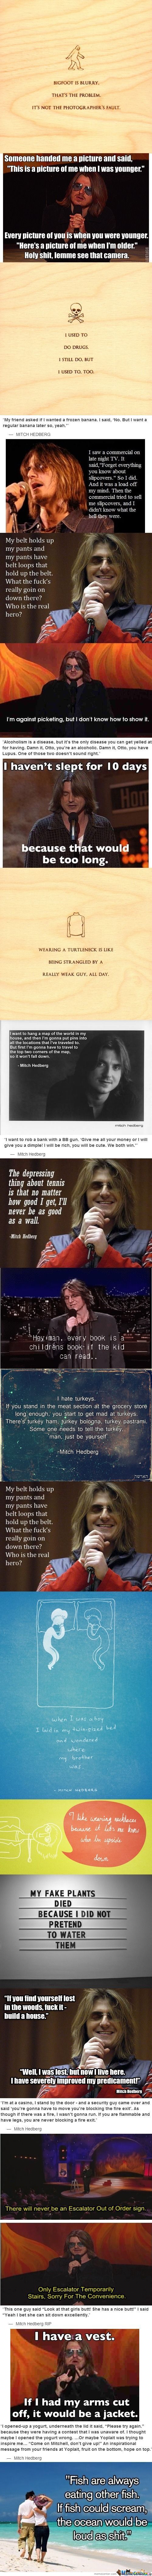 Mitch Hedberg is so funny!